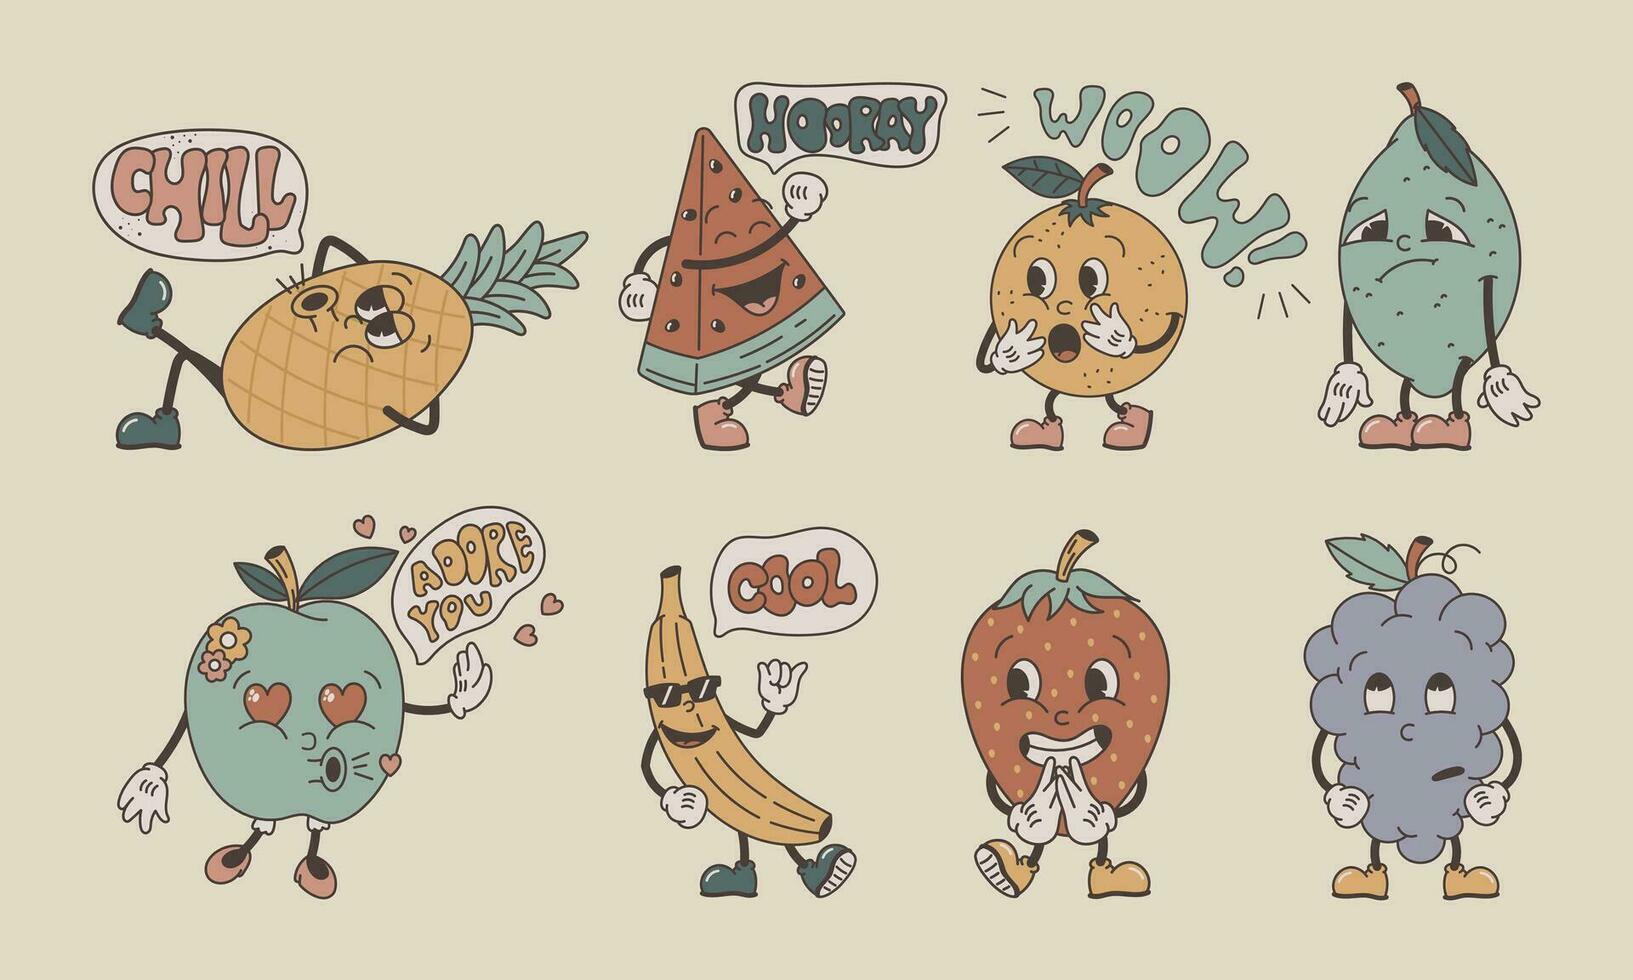 Funny groovy retro characters. Fruit emoticons with emotions, set of vector isolated illustrations, old cartoon style.